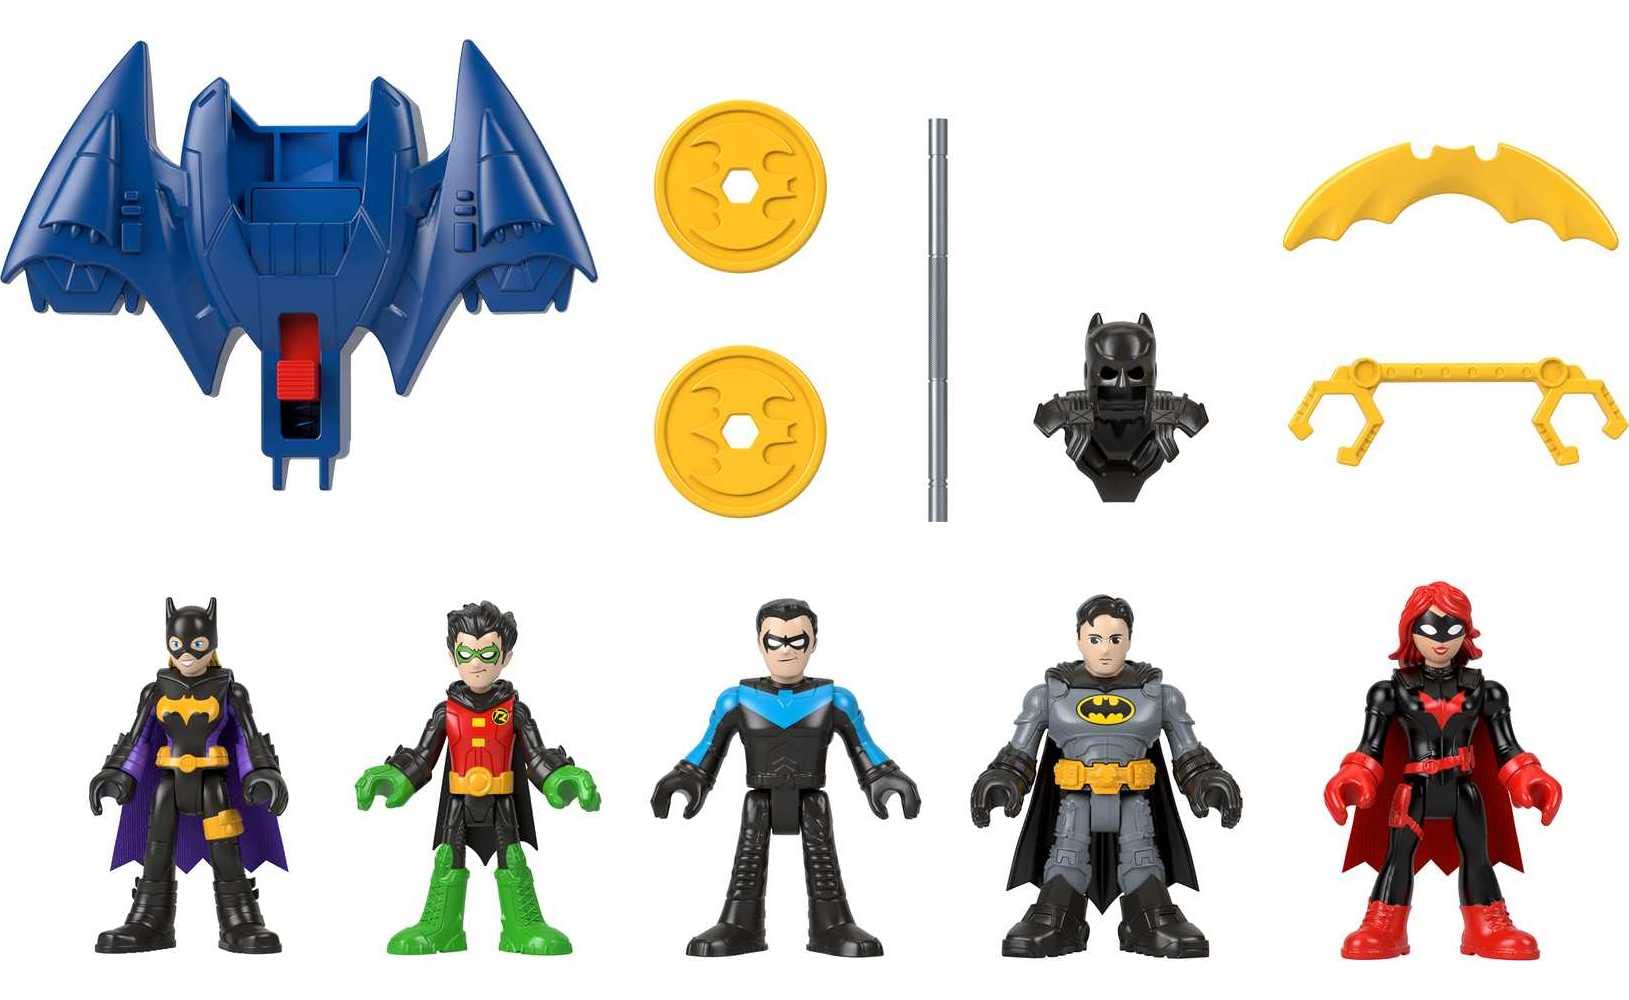 Fisher-Price Imaginext DC Super Friends Batman Toys Family Multipack Figure Set with 5 Characters & 7 Accessories for Ages 3+ Years